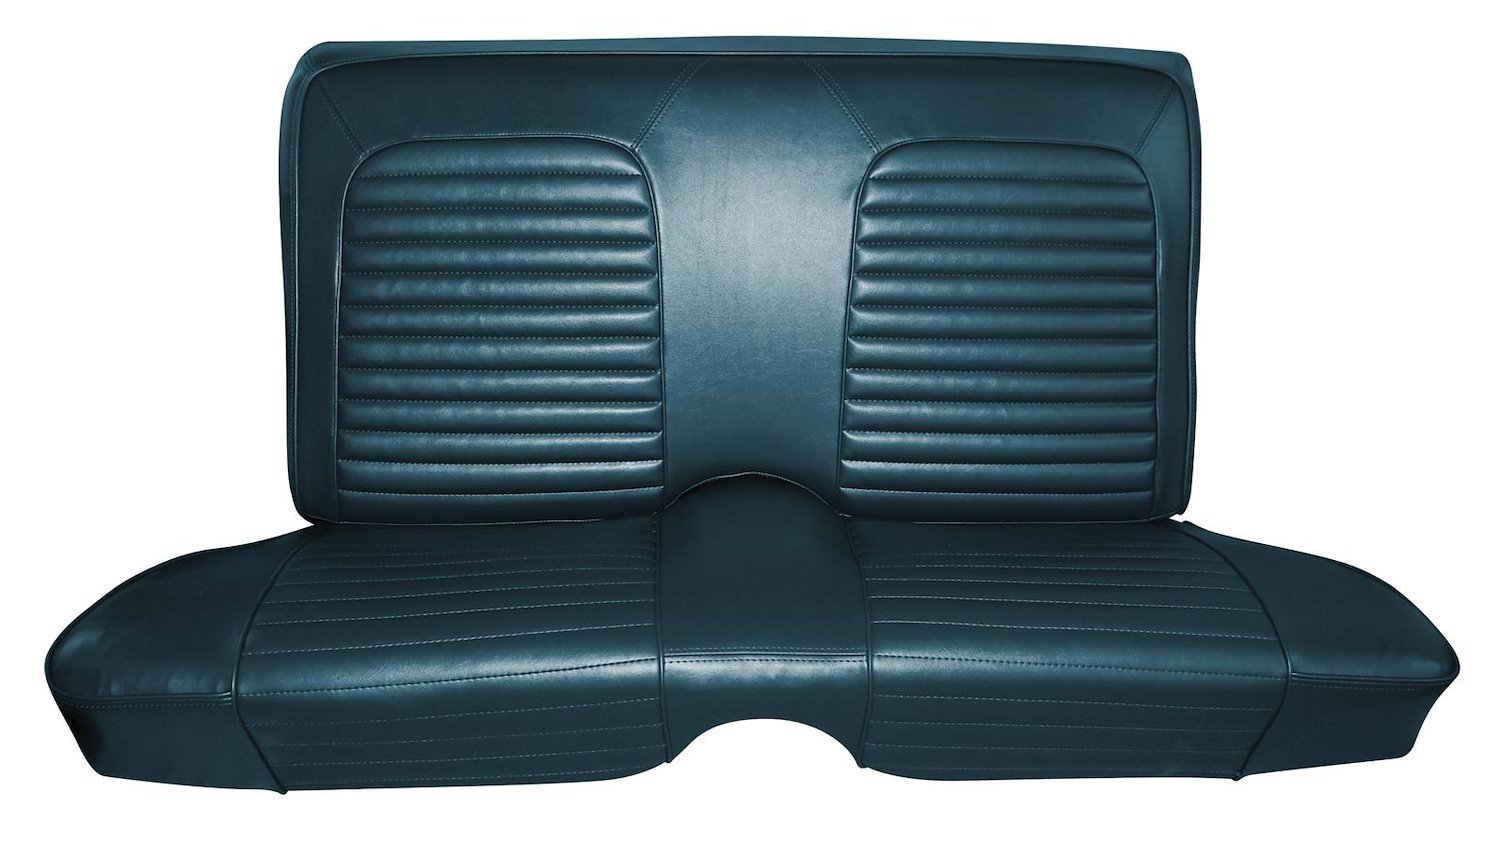 1971-72 Chevrolet Chevelle Malibu and Super Sport Convertible Interior Rear Bench Seat Upholstery Set